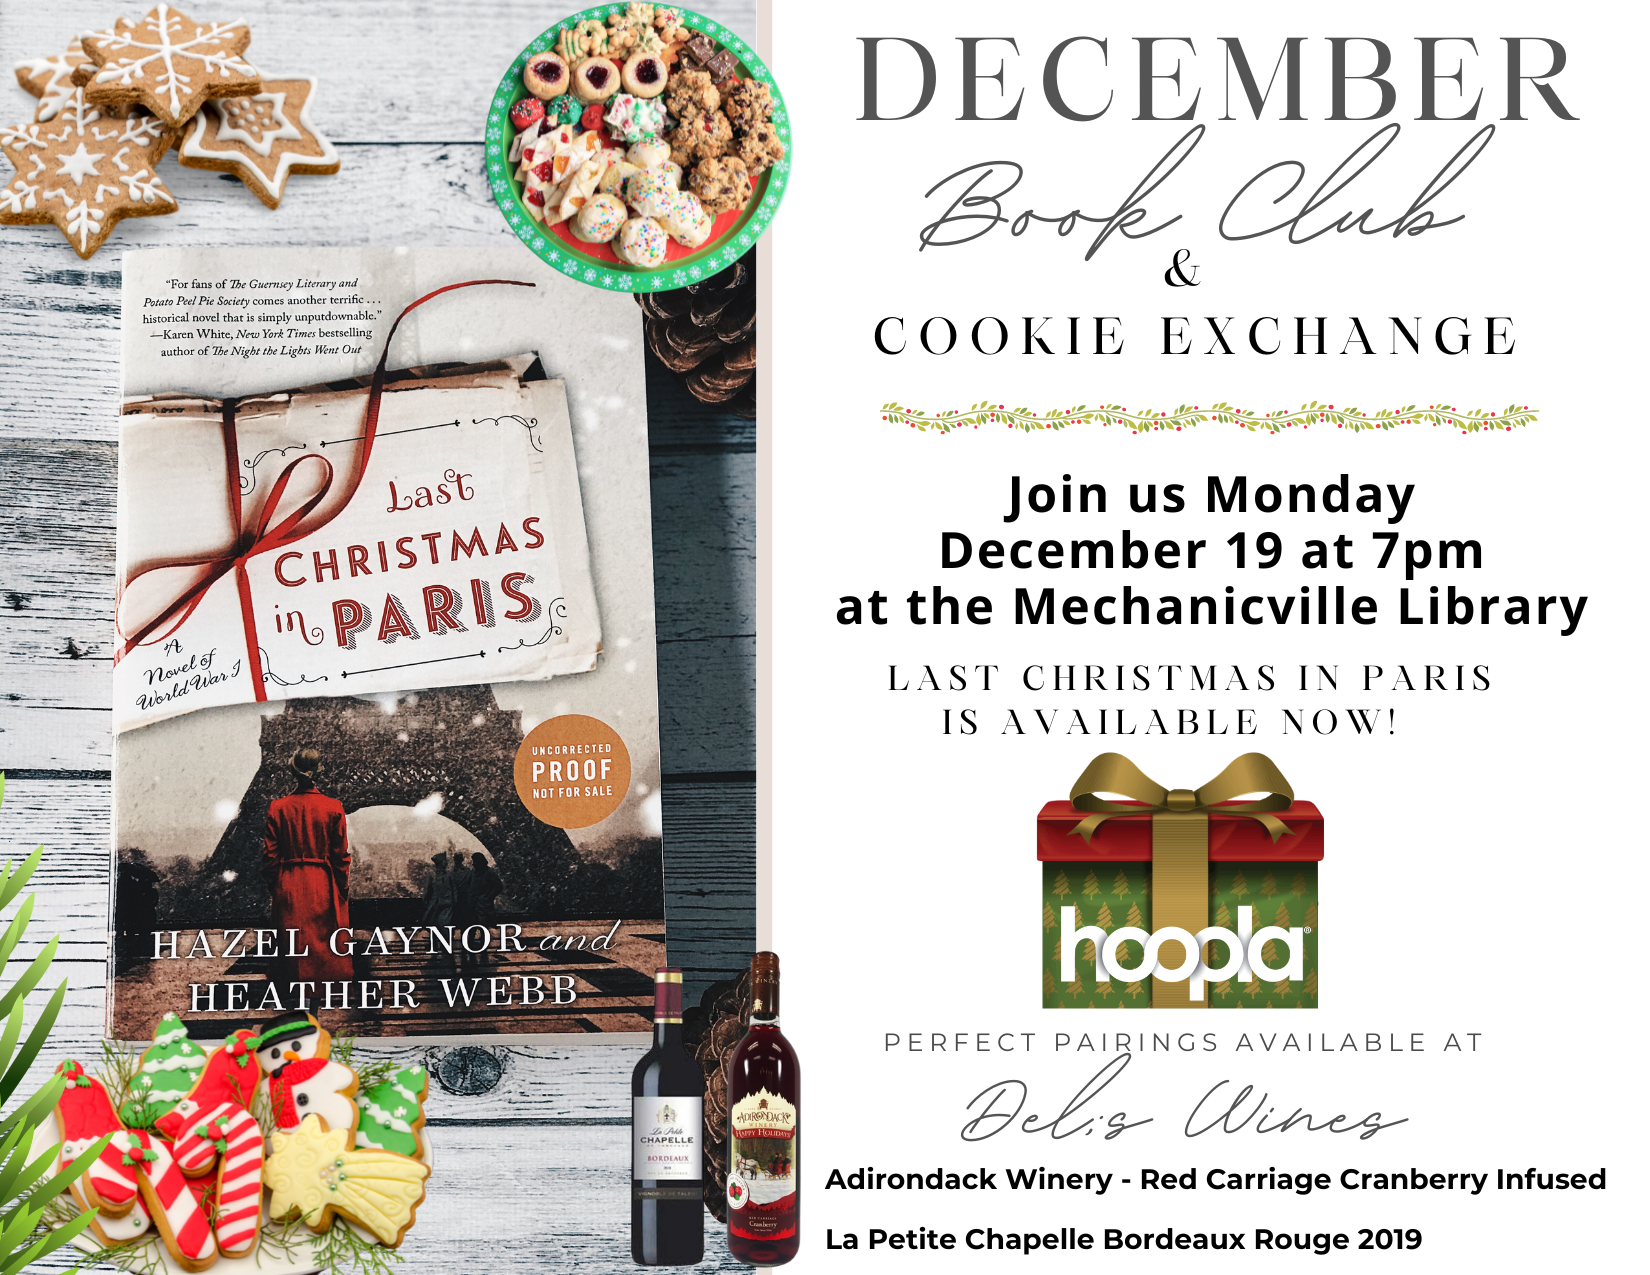 Book Club & Cookie Exchange! @ Mechanicville District Public Library | Mechanicville | New York | United States